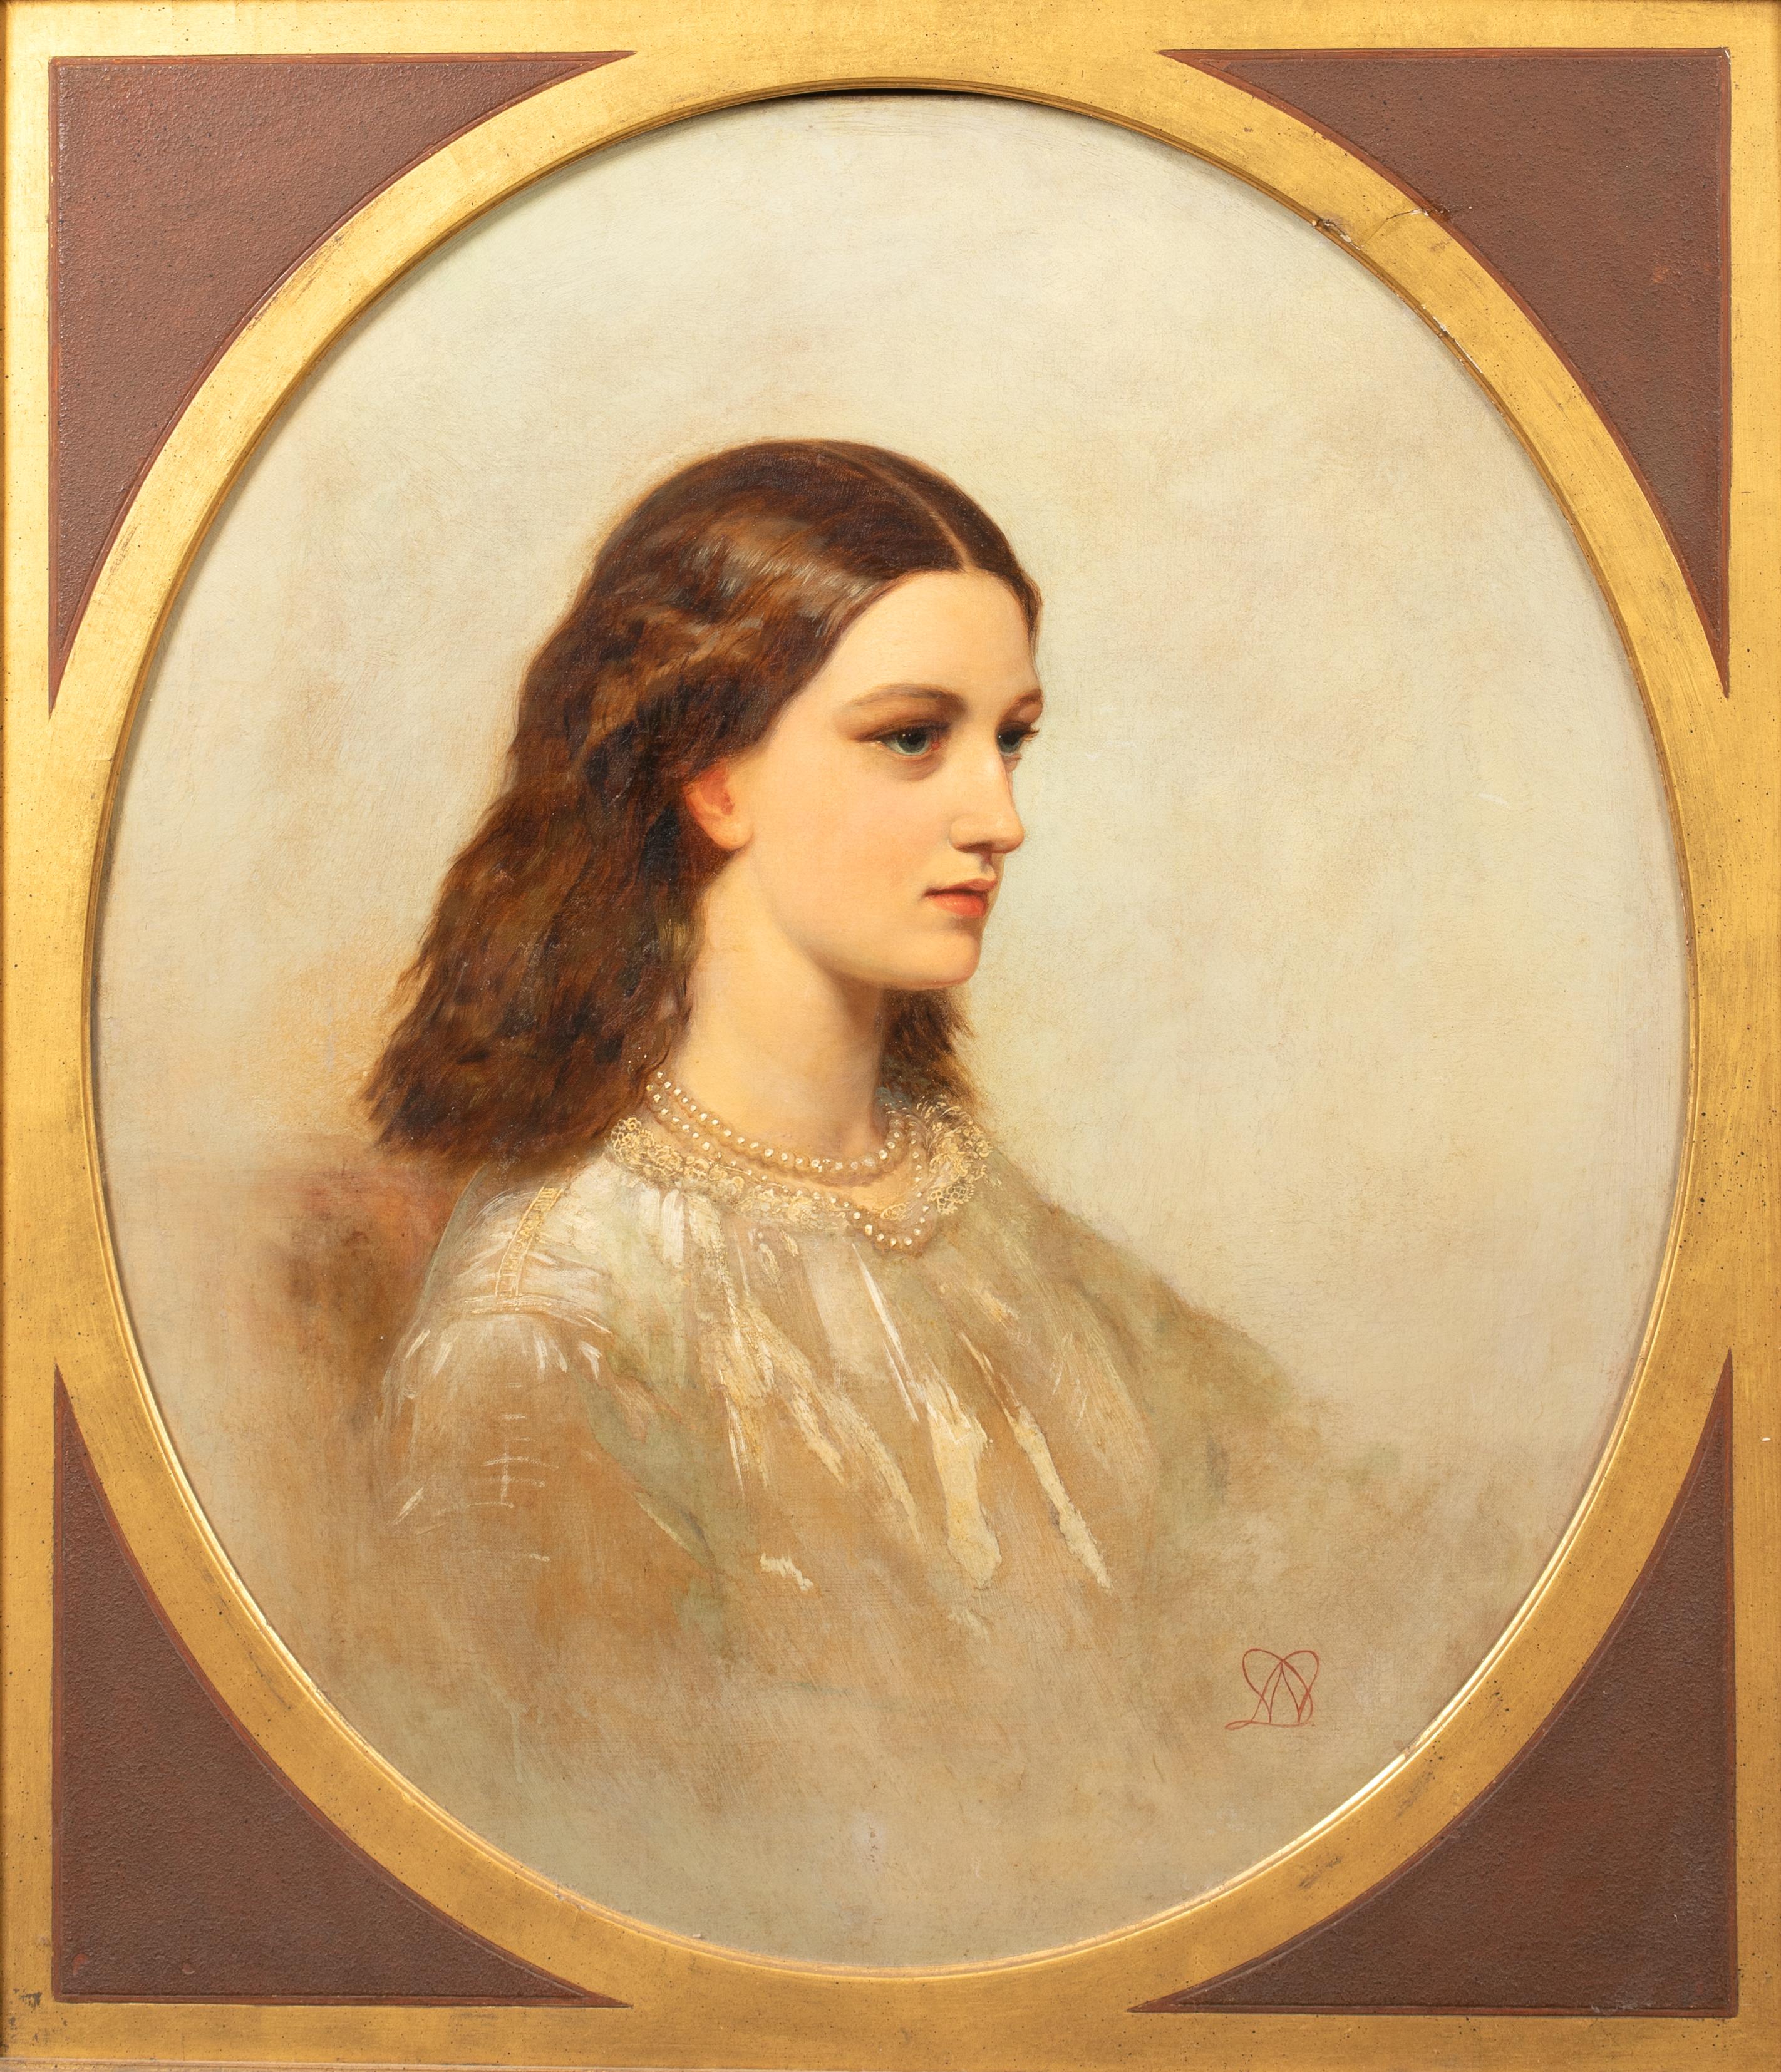 Portrait Of A Lady, Rebekkah Solomon, 19th Century

Monogrammed WM - William Morris

Large 19th Century Pre-Raphaelite portrait of a lady, Rebekka Solomon, oil on canvas monogrammed WM. Excellent quality and condition portrait of the young sitter